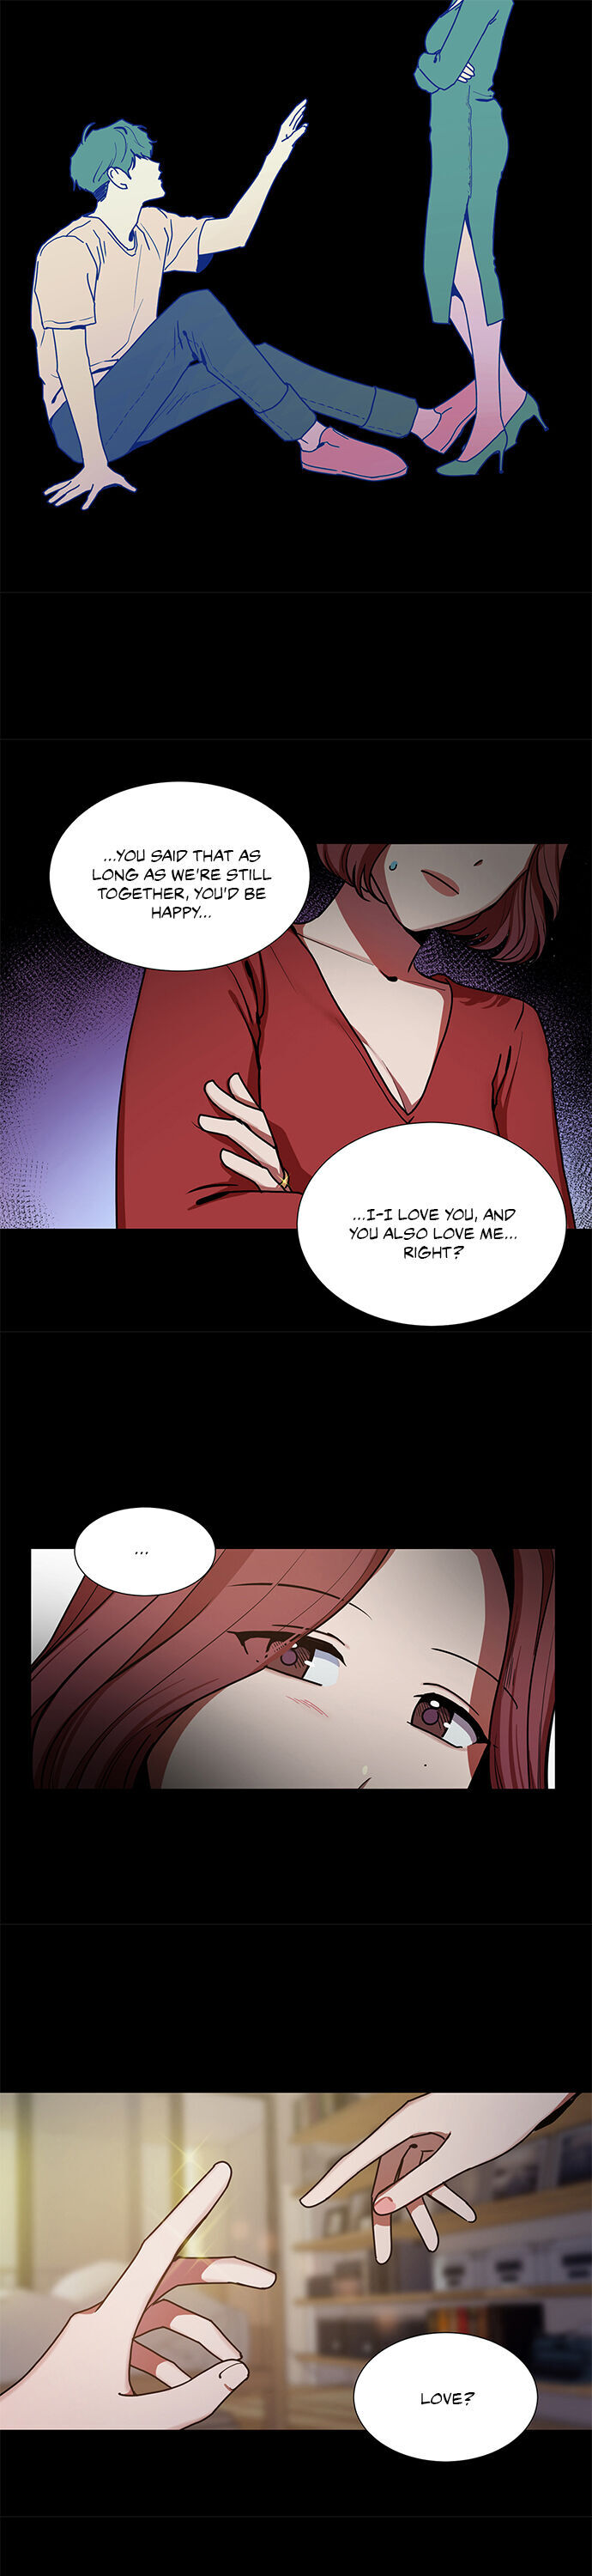 One More Time - Chapter 8 Page 6